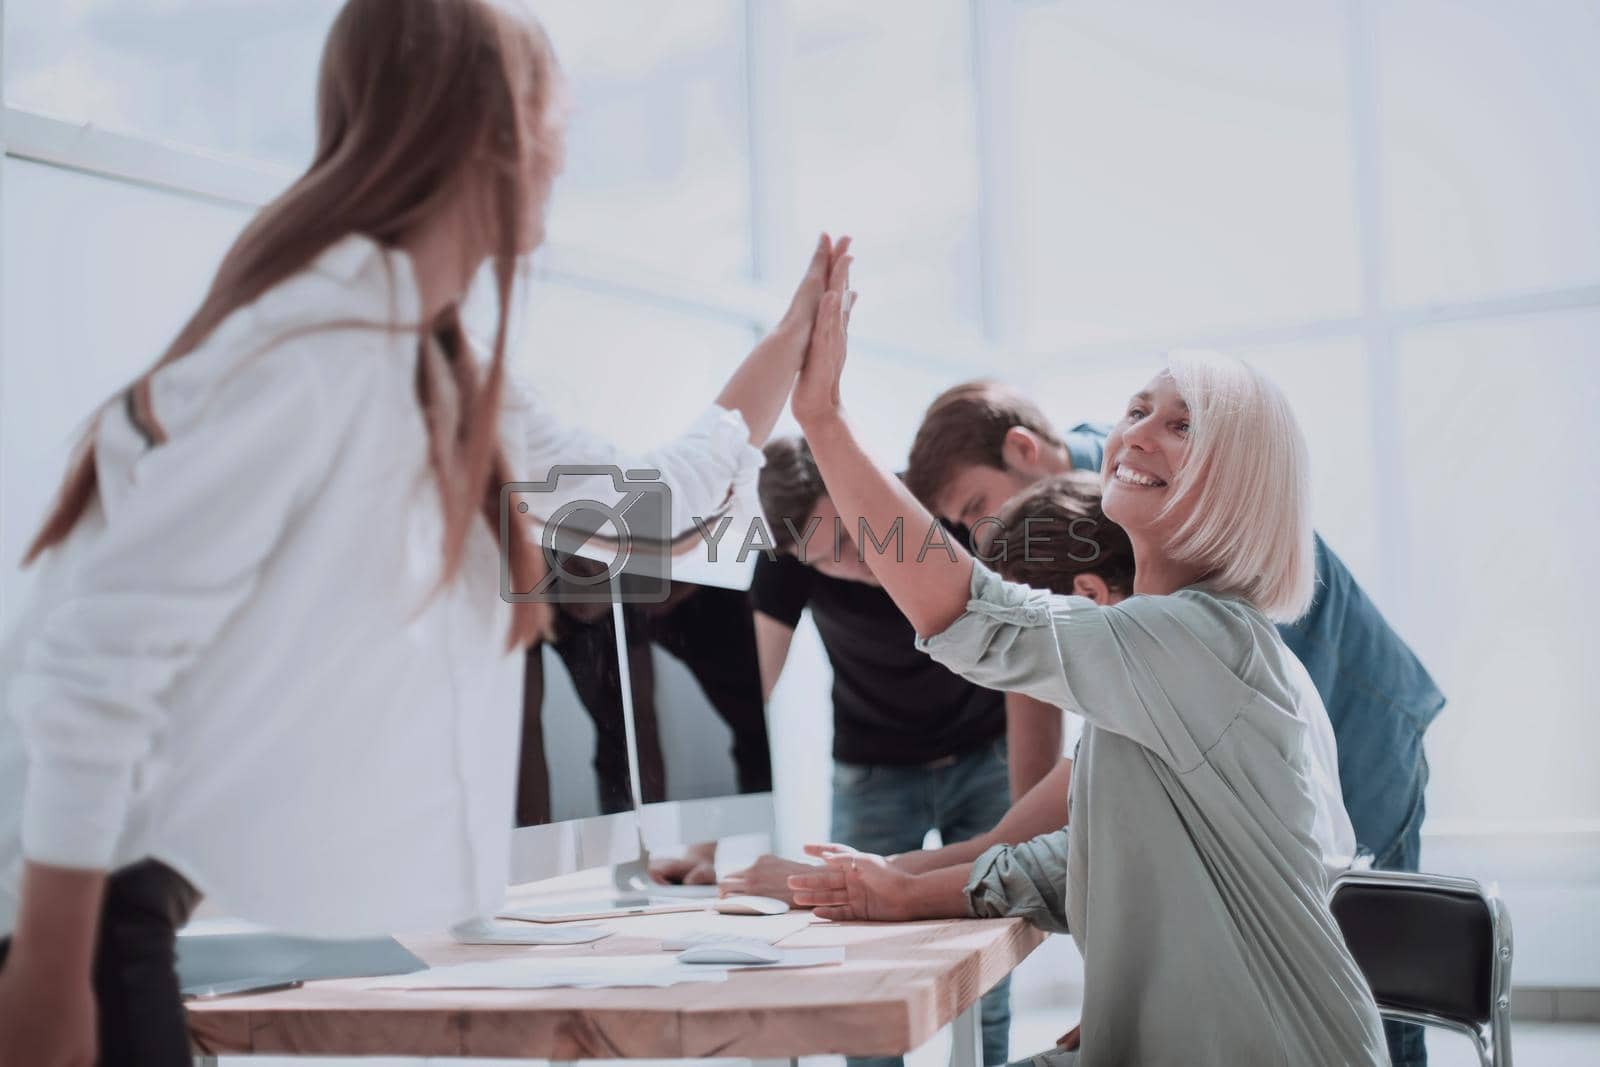 Royalty free image of smiling employees giving each other a high five by asdf